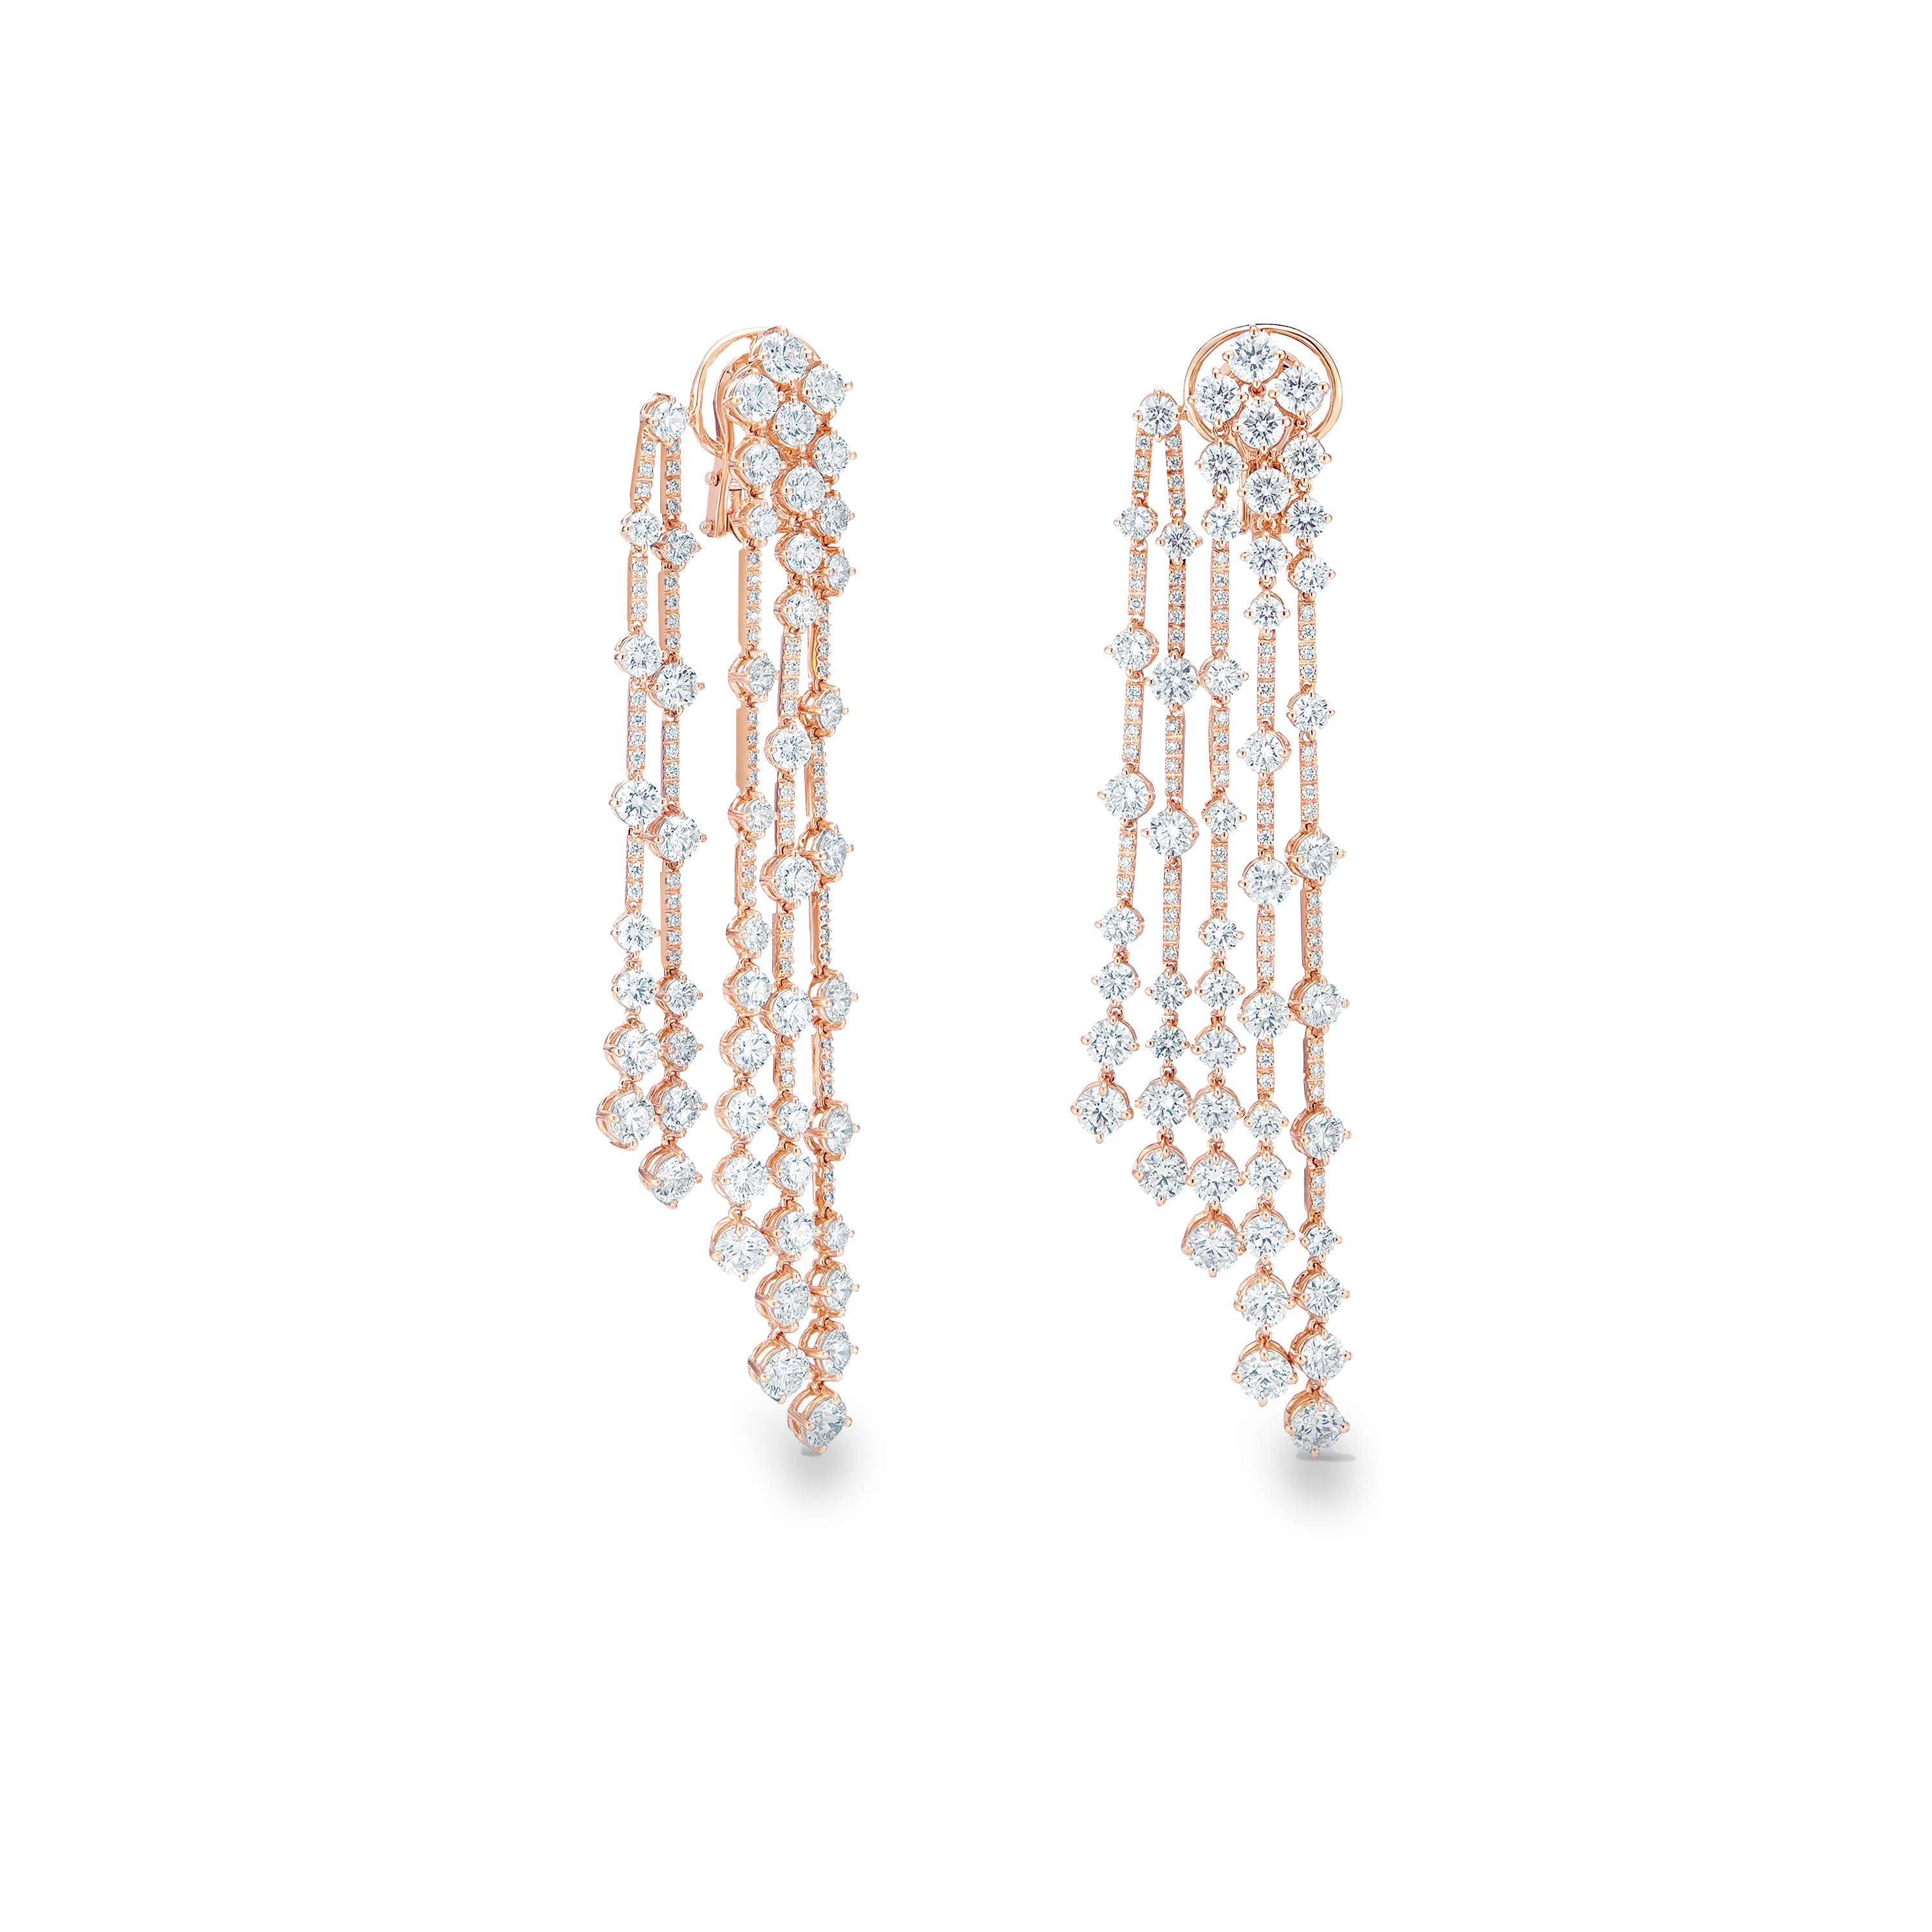 Arpeggia five line earrings in rose gold, image 1